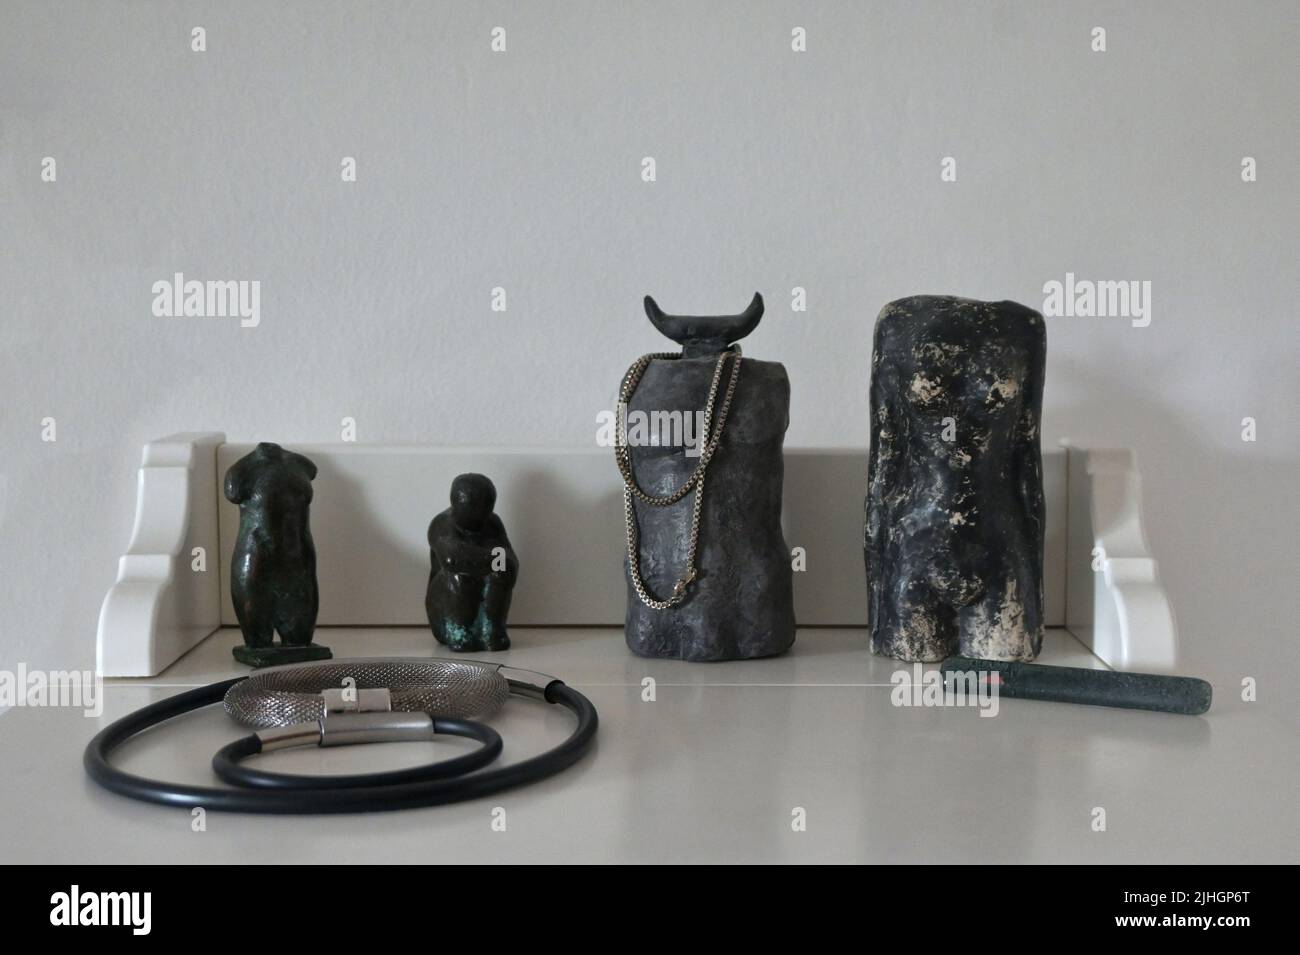 display of sculptures and jewellery Stock Photo